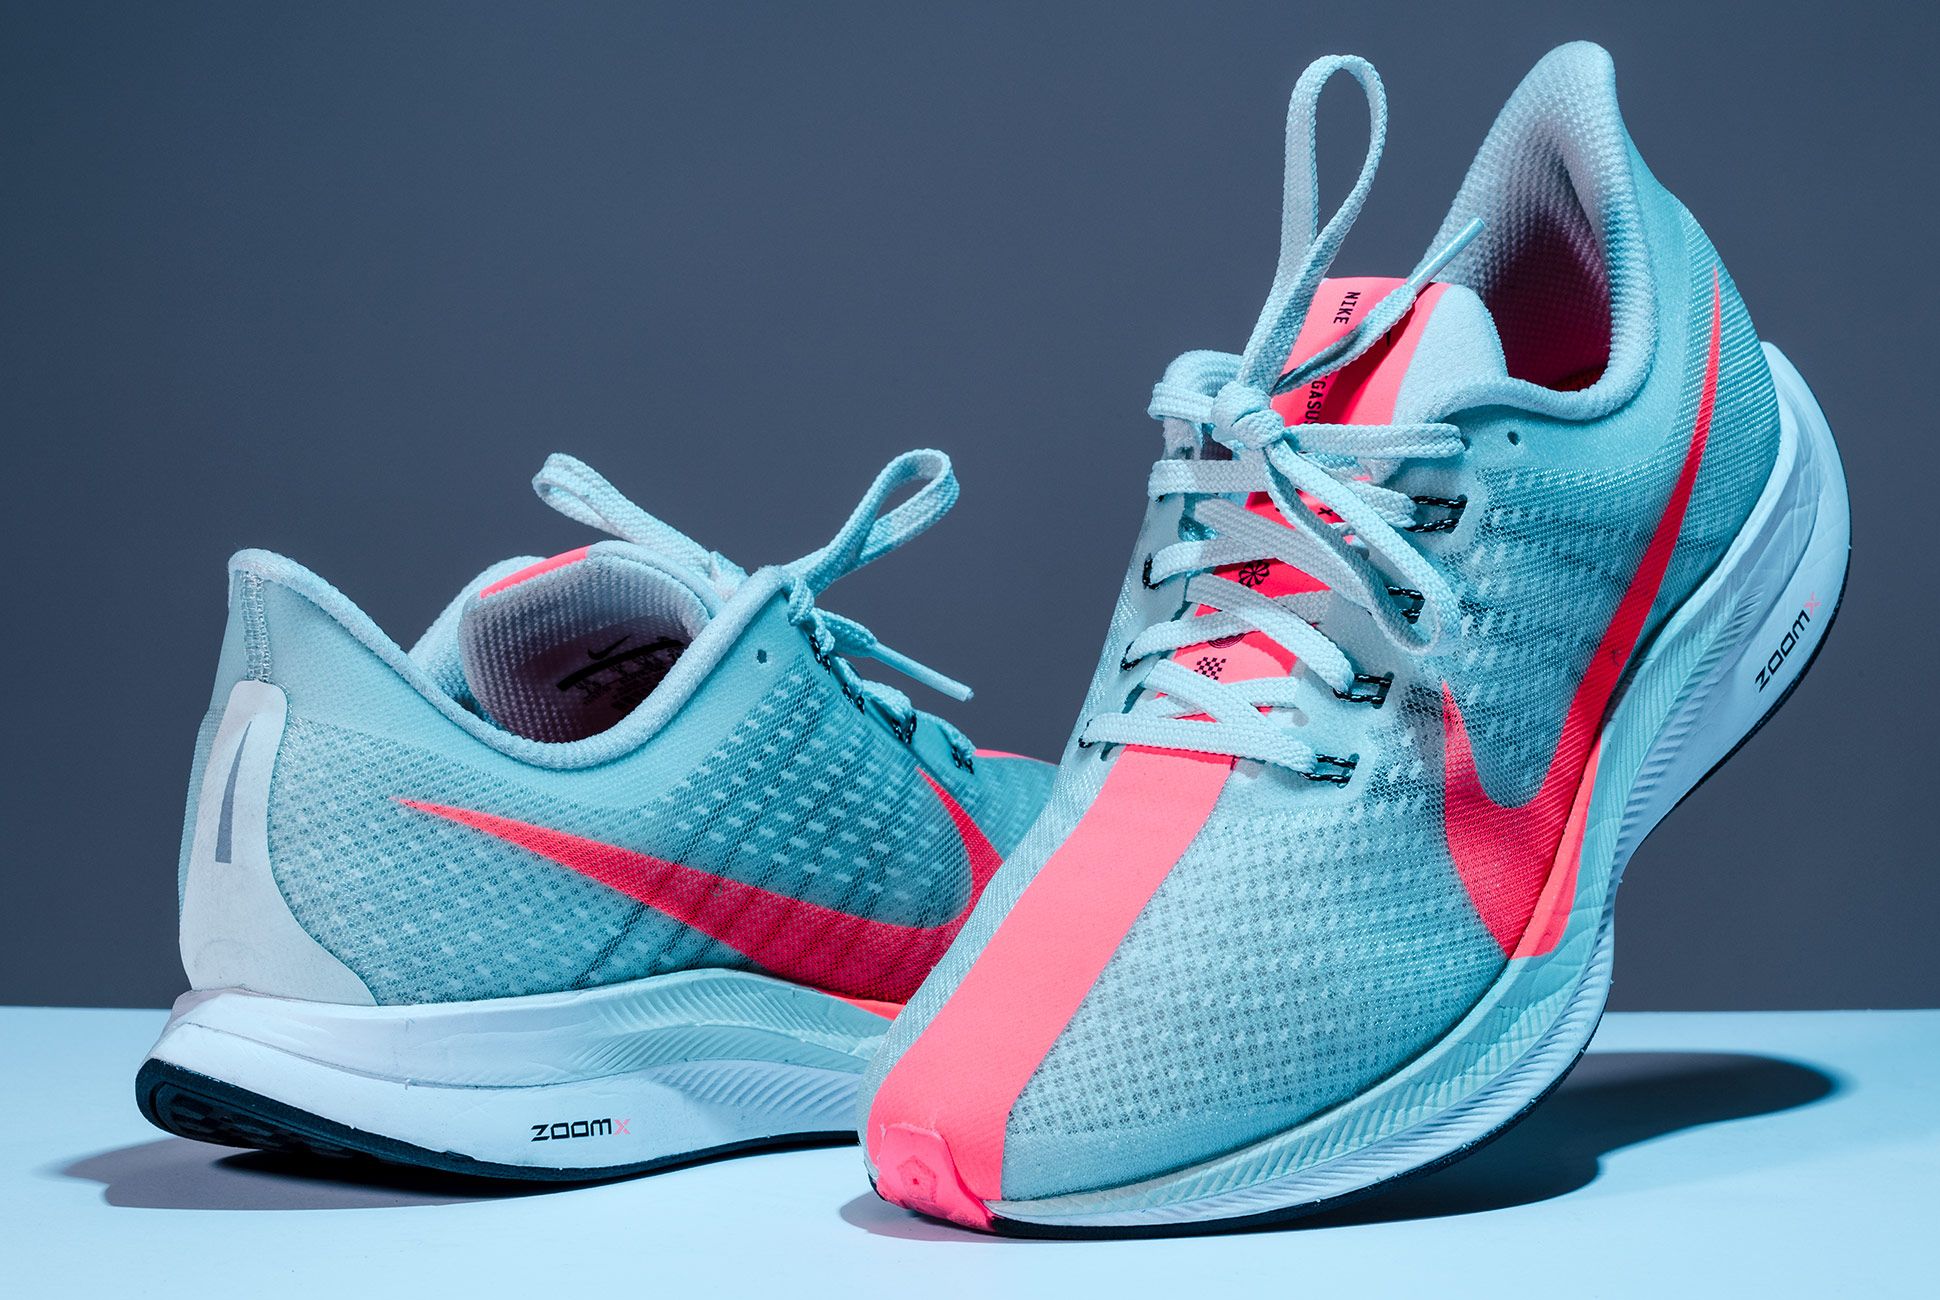 Nike Pegasus Turbo Review: An Everyday Trainer That Feels Fast